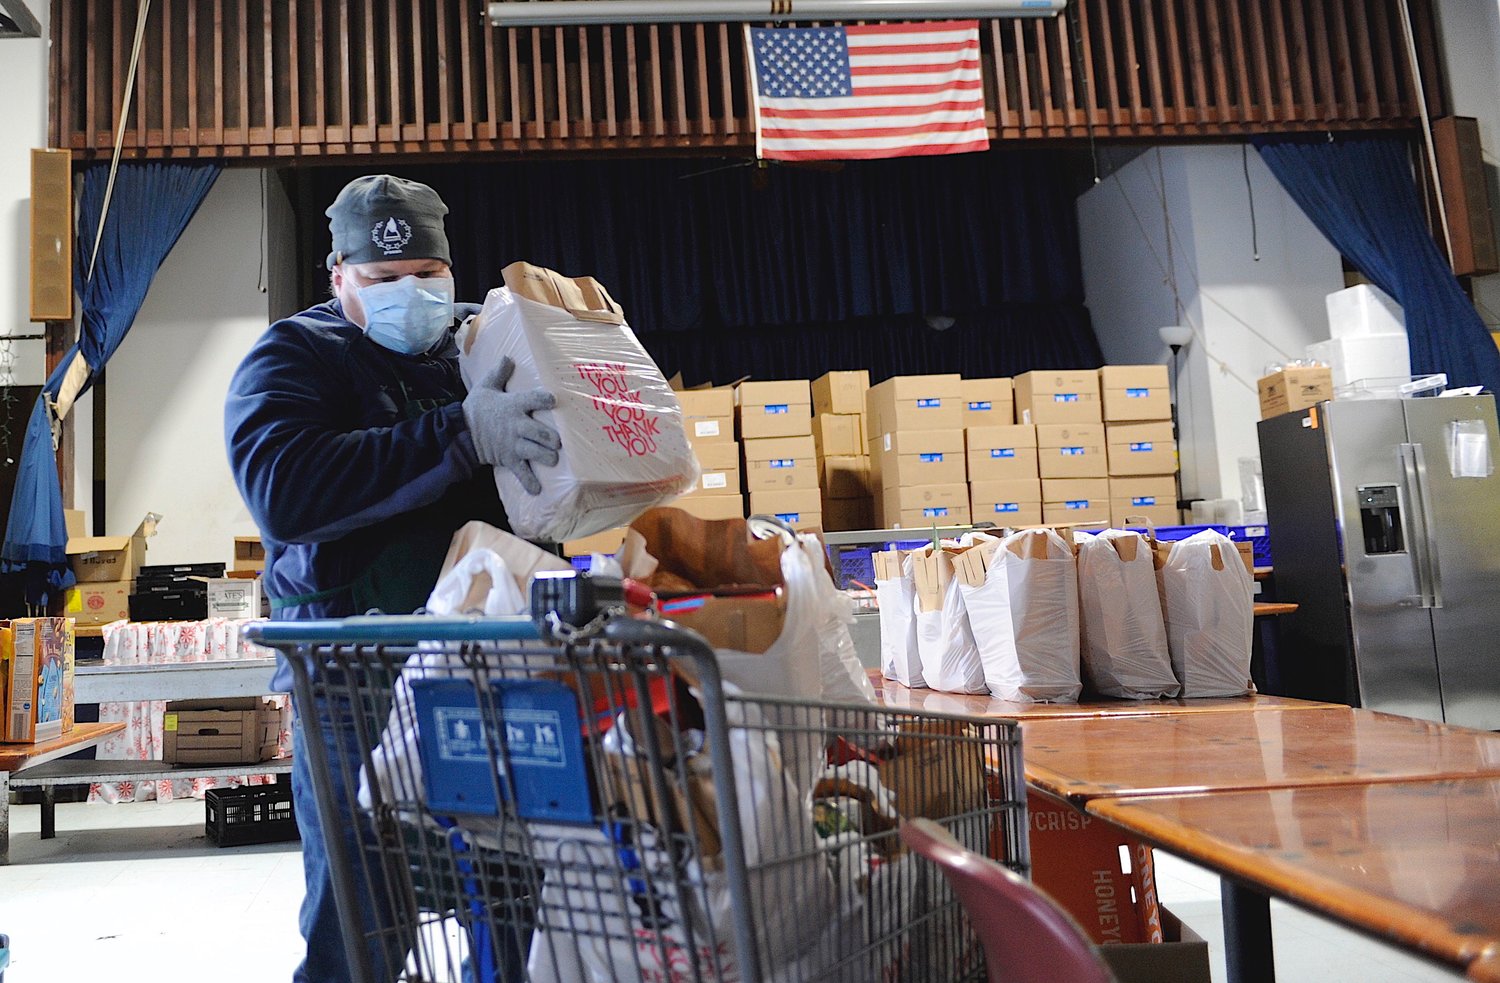 Mike Steinbeck, the cook for the Sullivan County Federation for the Homeless (SCFH), places bags of donated food into a shopping cart for transportation to the food shed, where the food is handed out during Friday’s food pantry program. That takes place from 11:30 a.m. to 1 p.m. The SCFH is located at 9 Monticello St. in Monticello.